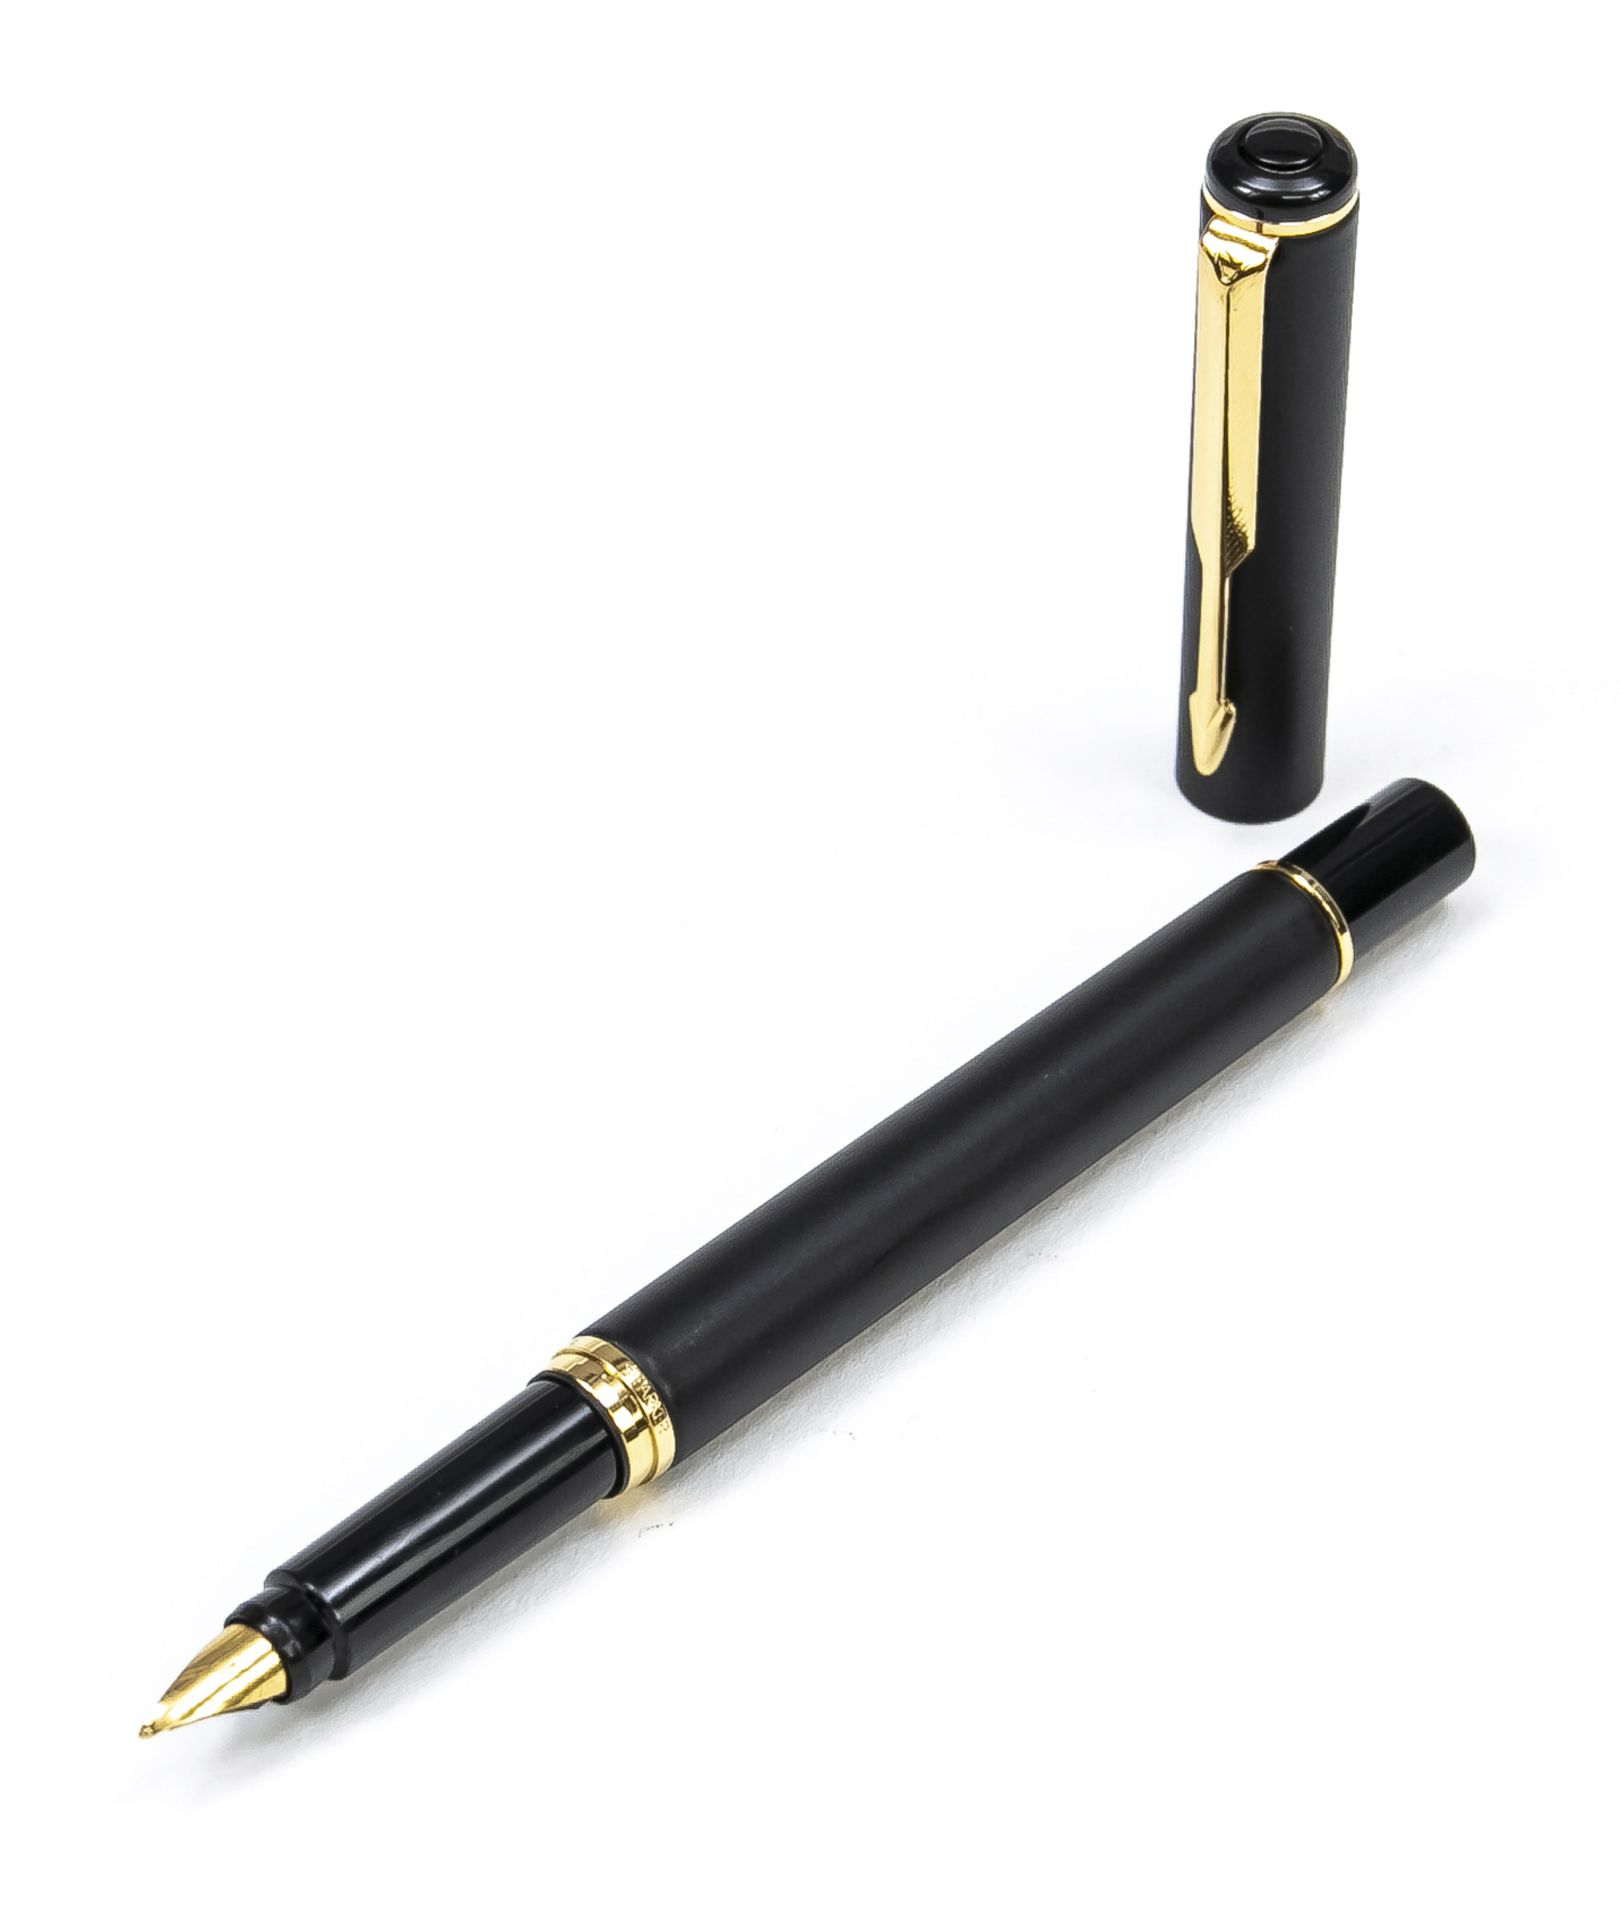 Parker converter fountain pen, 2nd half of 20th century, made in UK, gilded nib, black case,